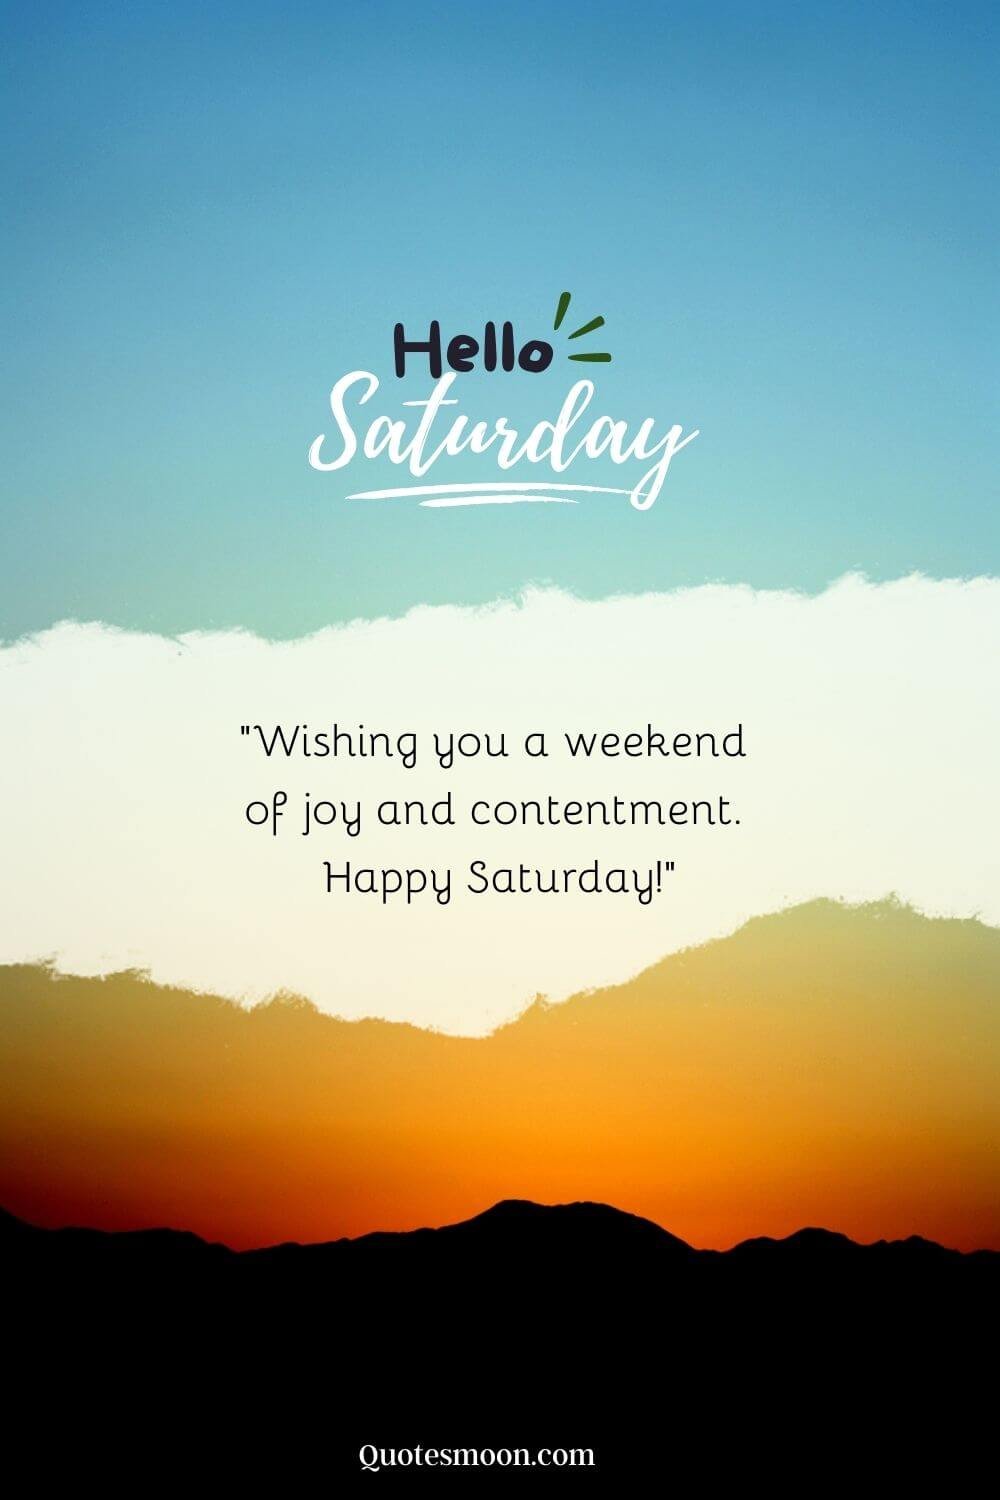 saturday a beautiful day start quotes images